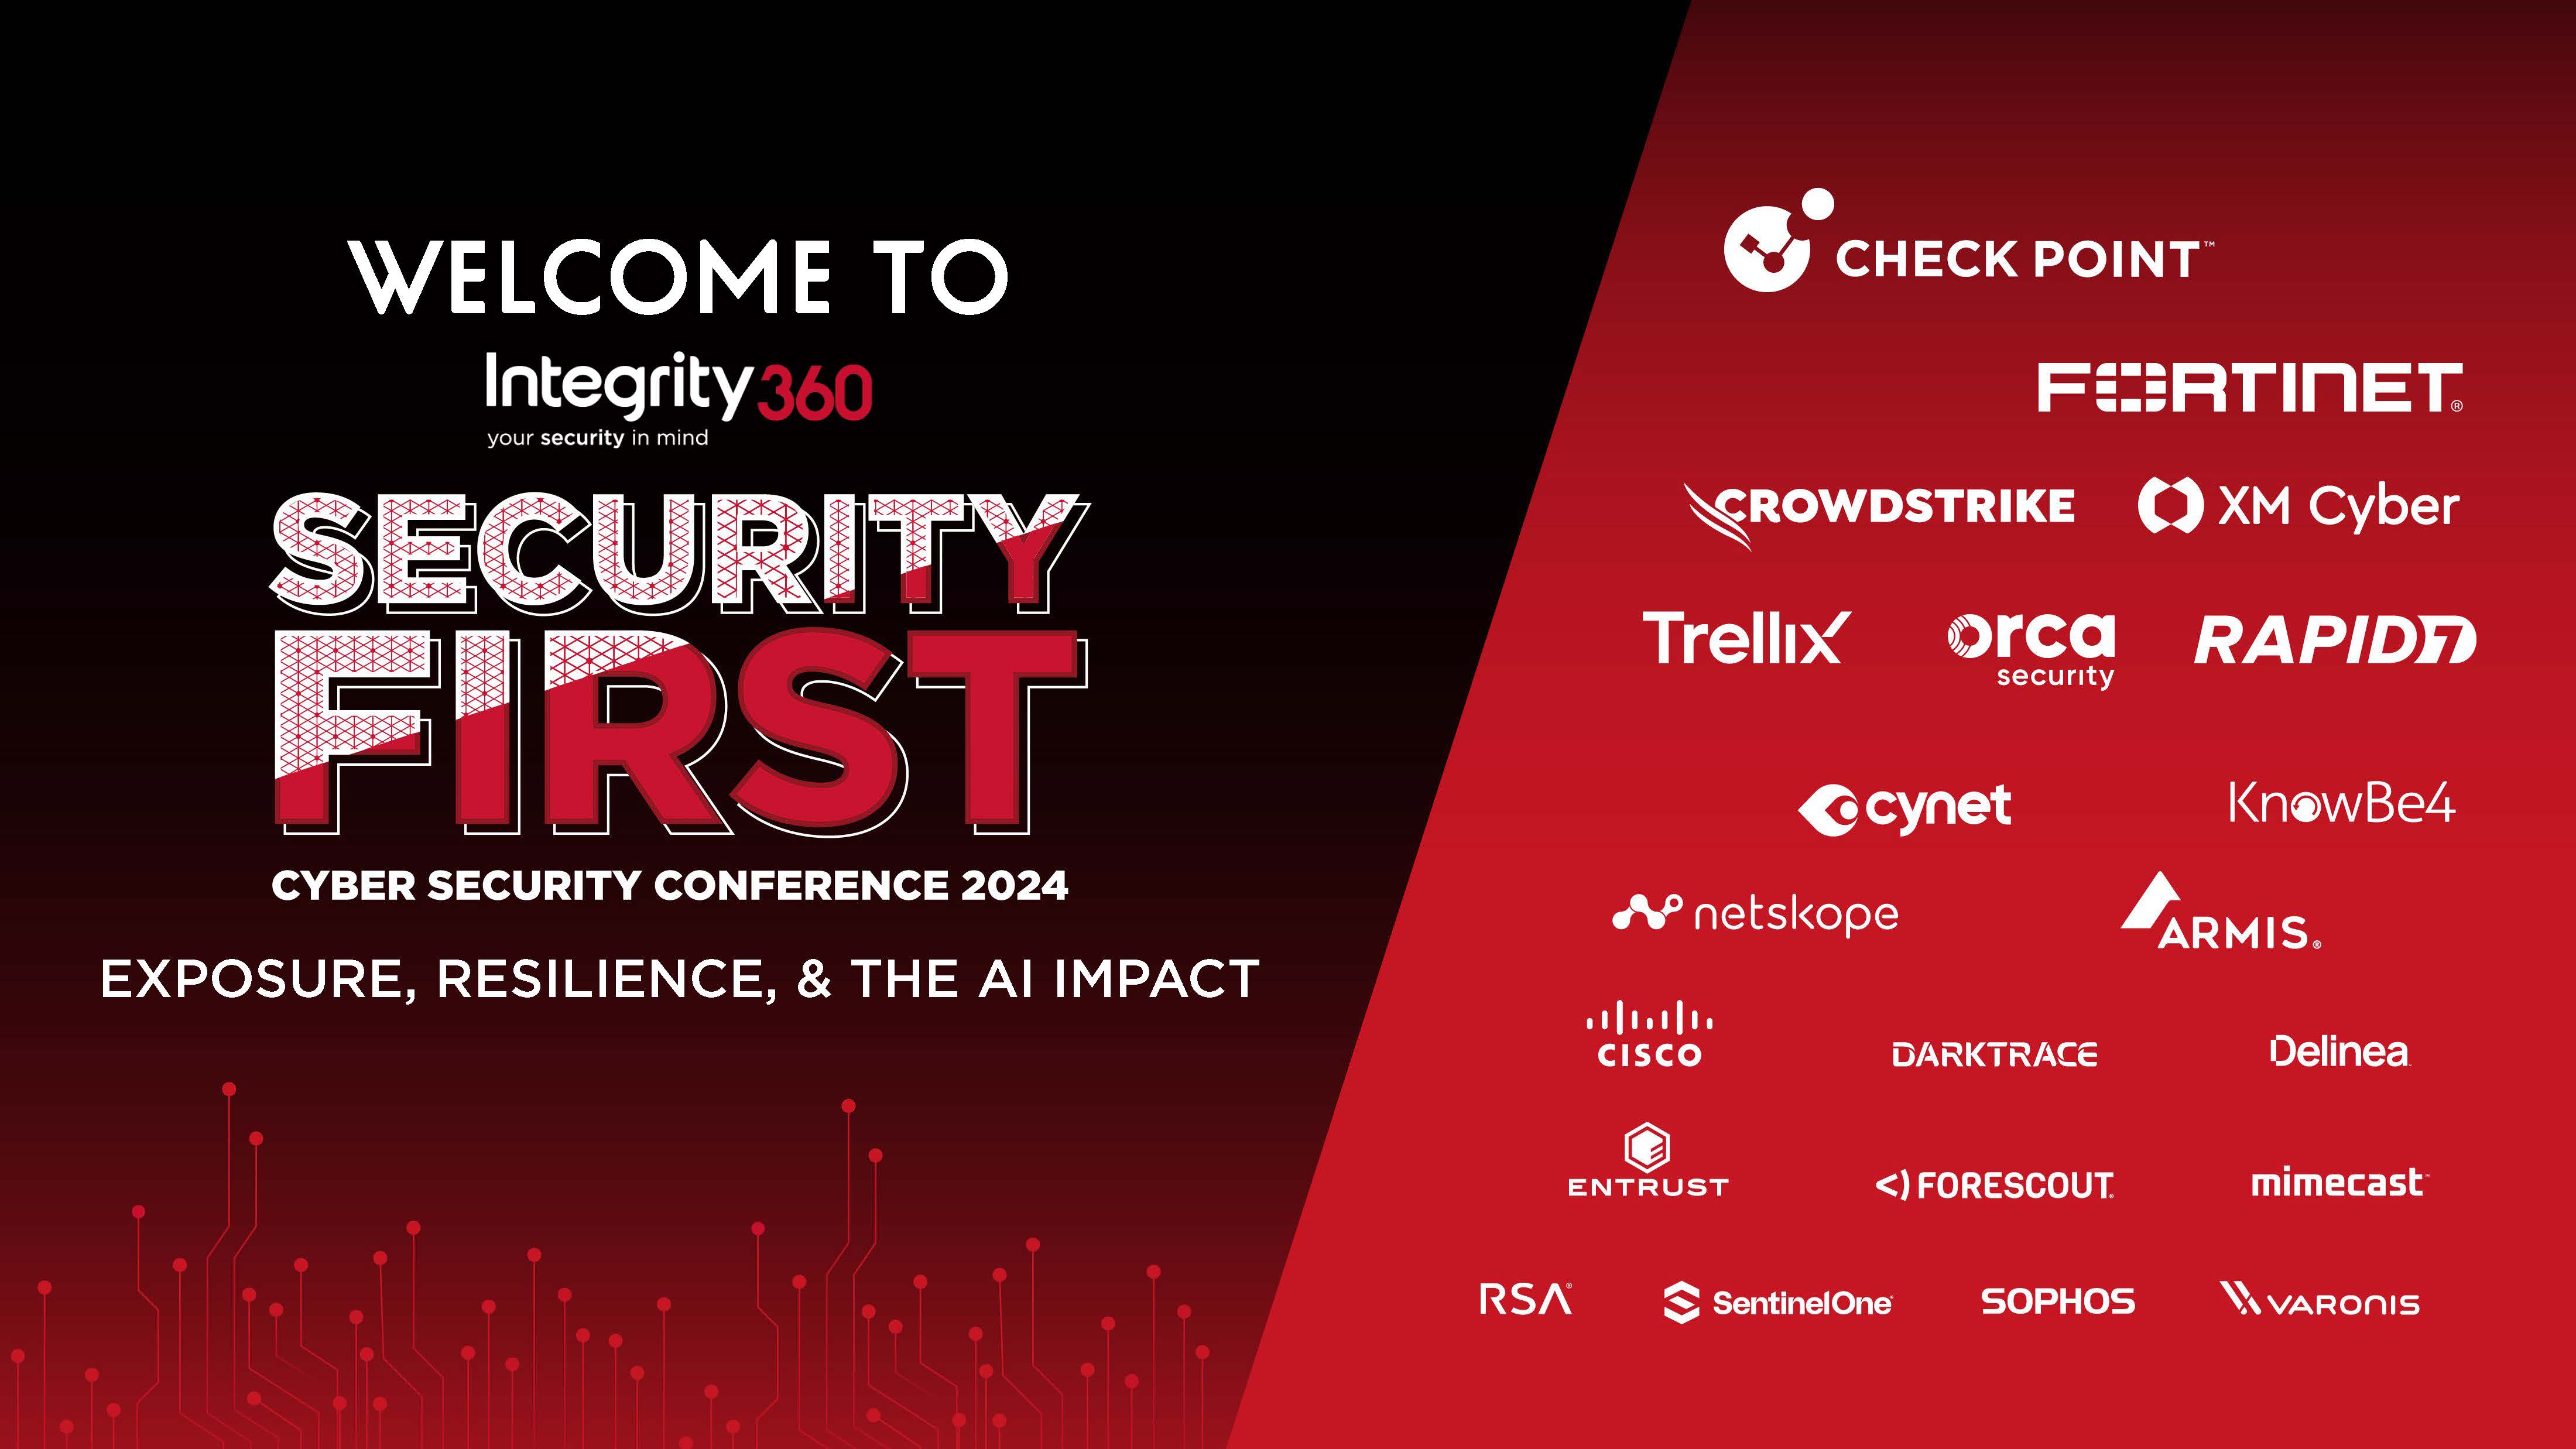 Security_First_2024_Masterdeck_DUBLIN_Page_001